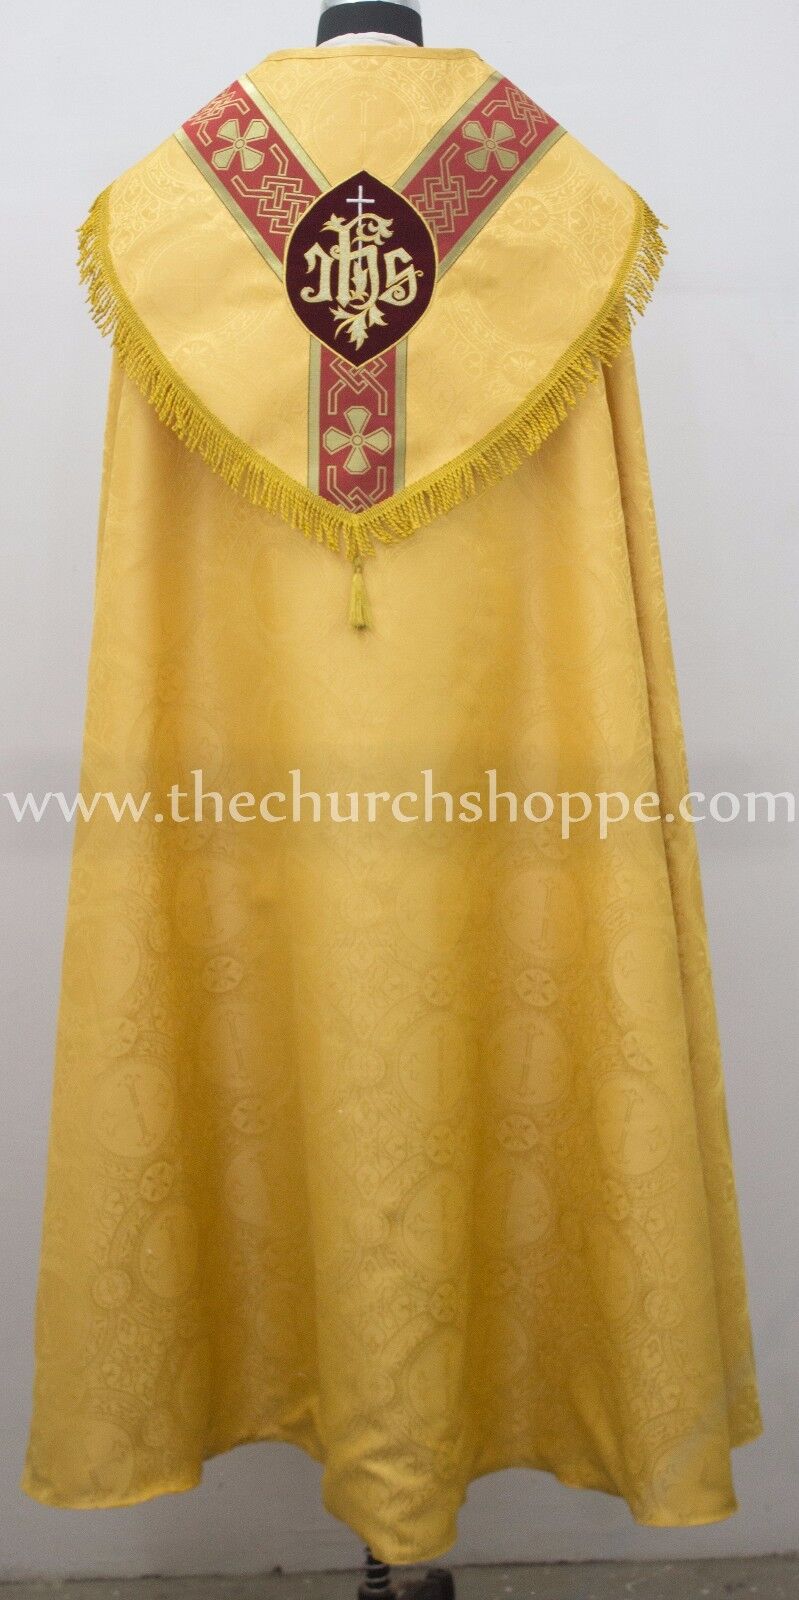 New Yellow Cope & Stole Set with IHS embroidery,capa pluvial,chape,far fronte